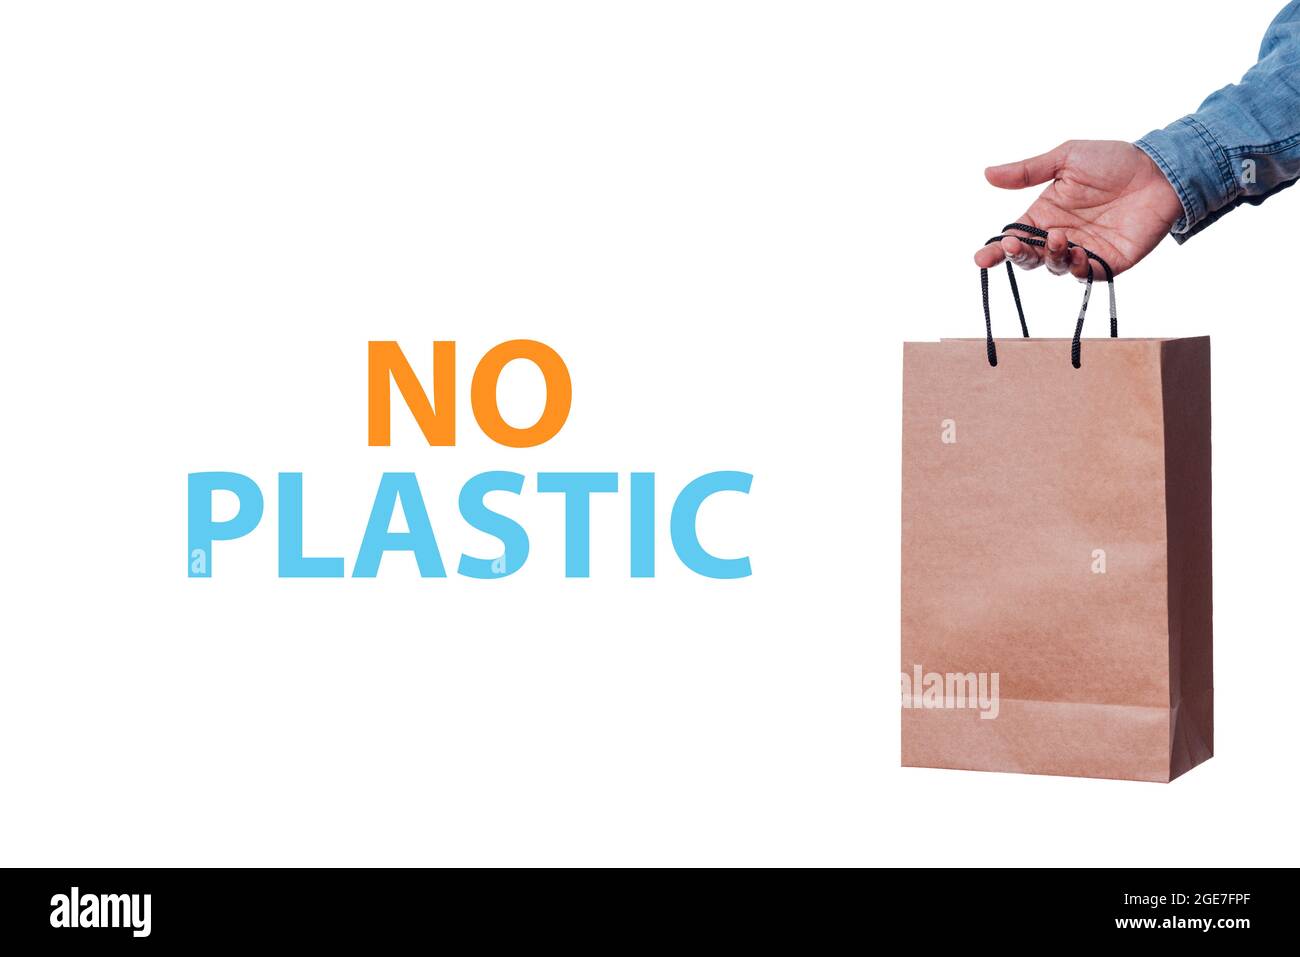 Stock image of a text that says no plastic and a man's hand holding an appel shopping bag on white background Stock Photo